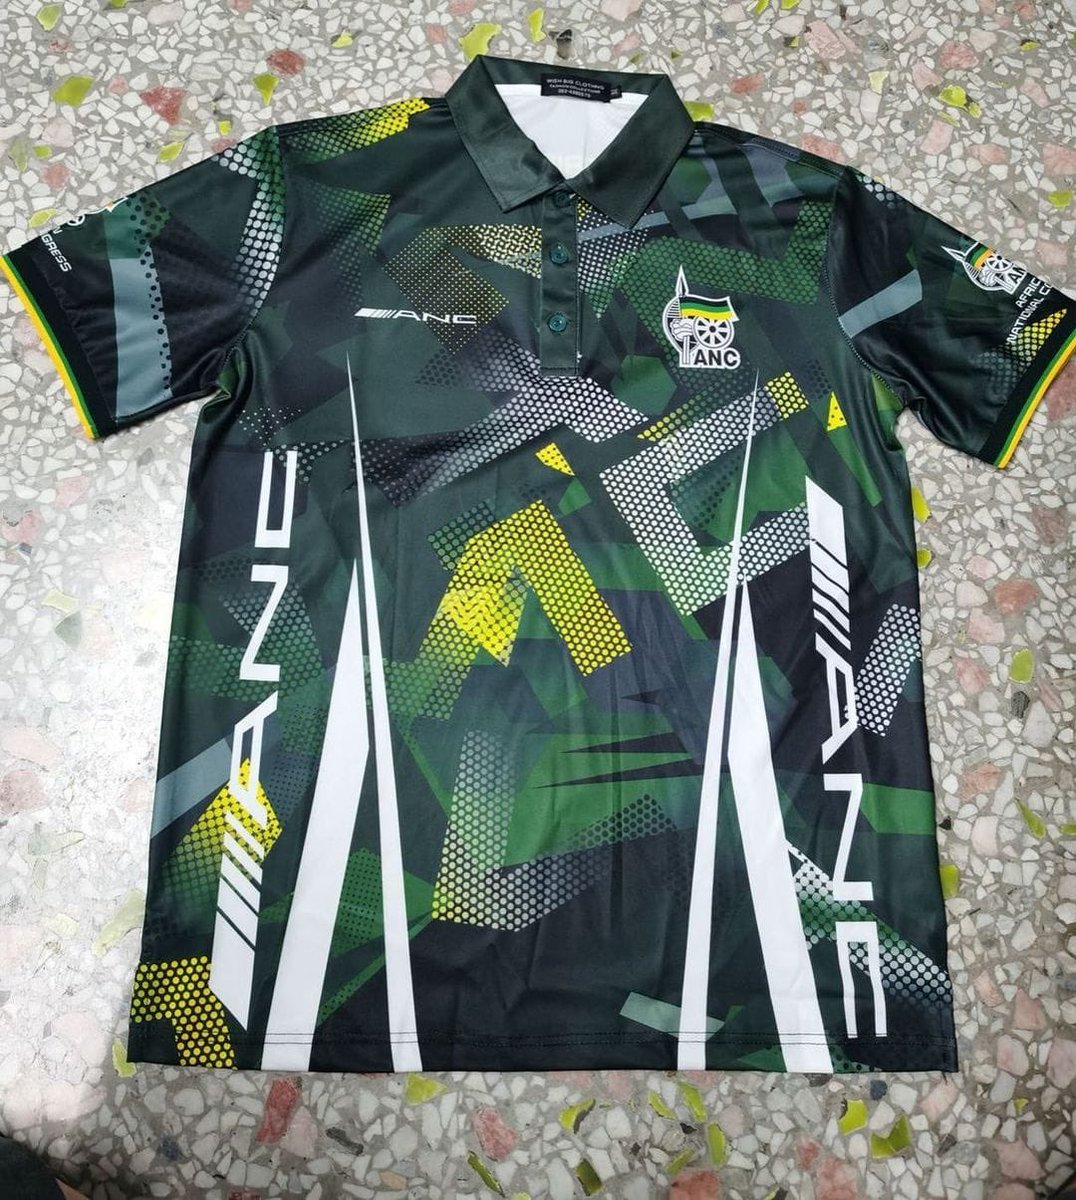 Comrades, where can I get this shirt here in Durban?